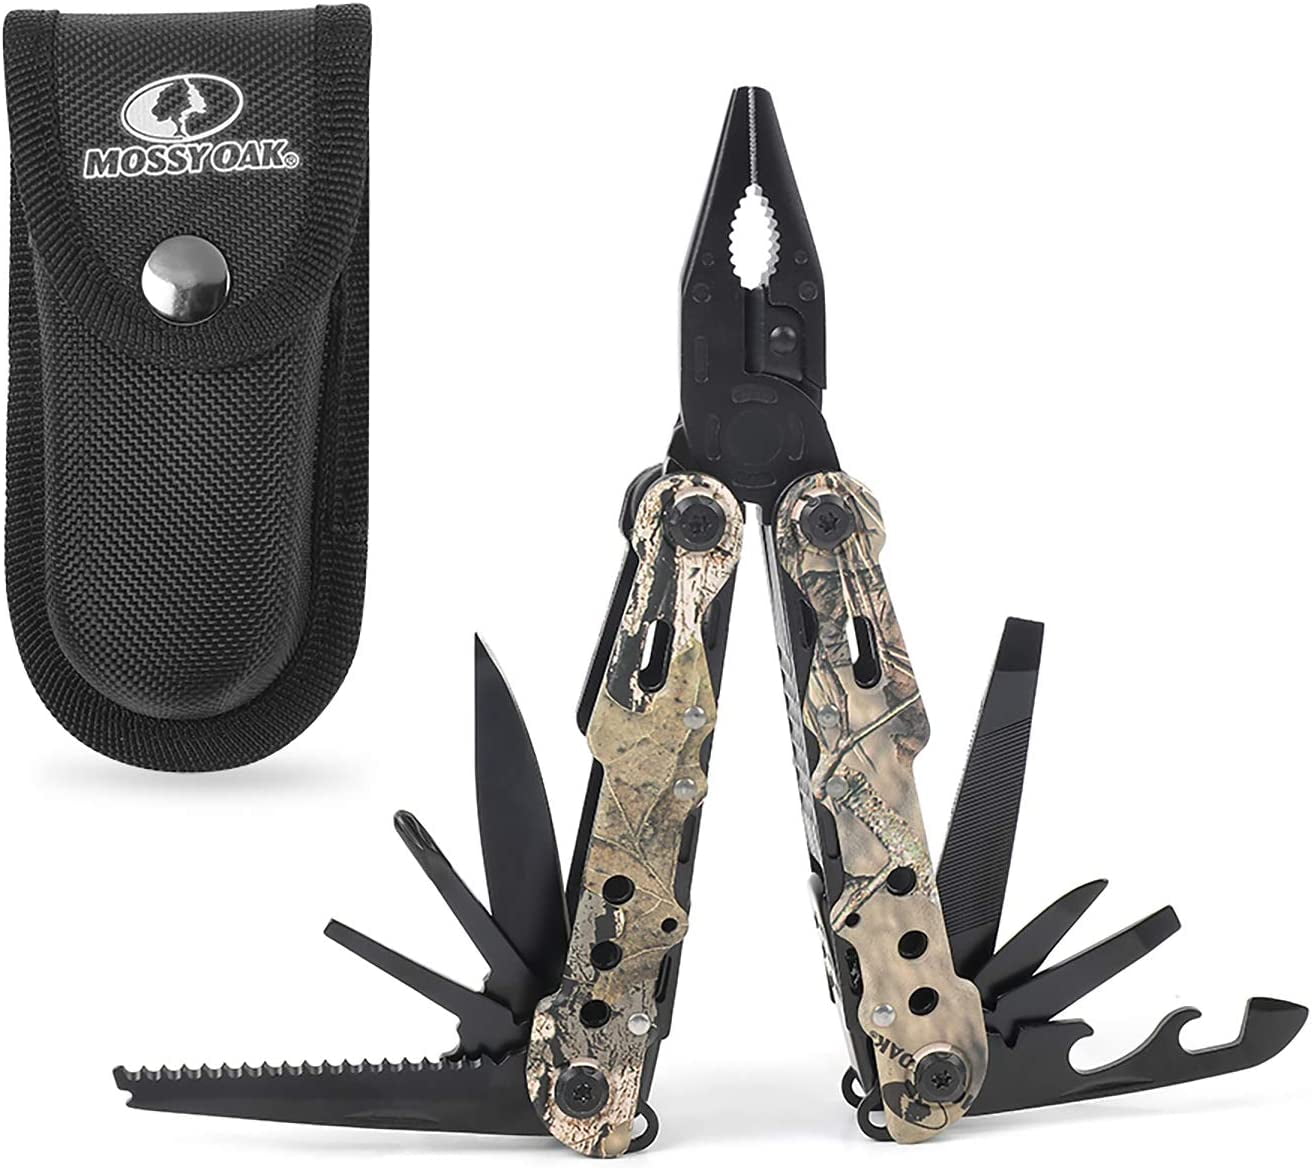 MOSSY OAK Multi-tool - 13 in 1 Multi Function Pliers - Folding Pocket Tool  with Sheath, Camo - Portable Pocket Knife for Outdoors, Survival, Camping,  Fishing, Hunting, Hiking 